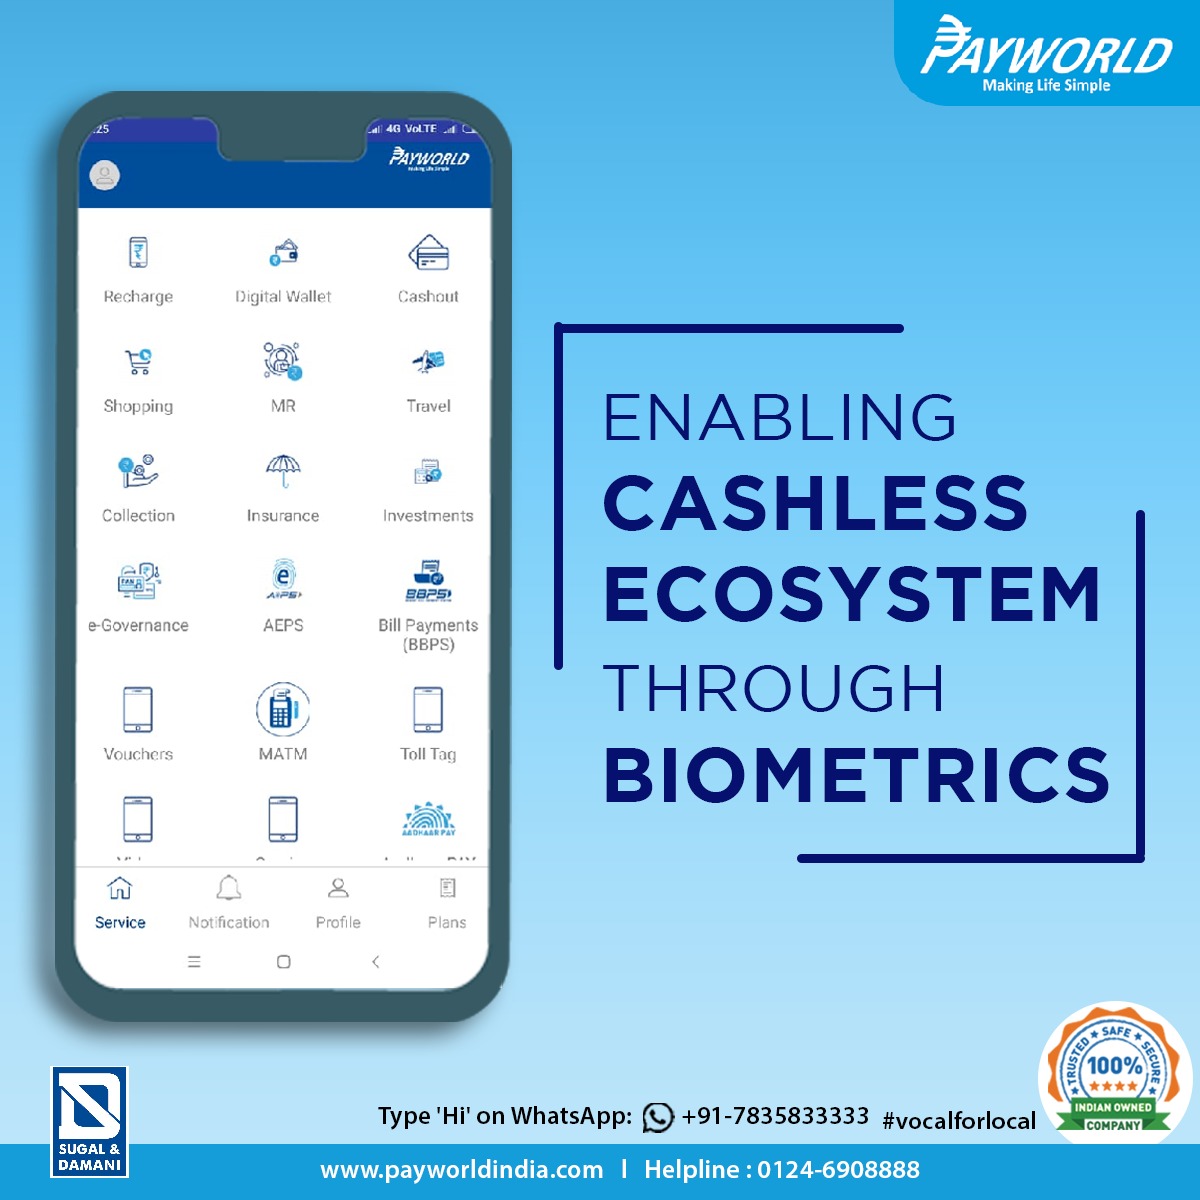 #Payworld is committed towards 'Making Life Simple' for all the stakeholders by making online transactional services fast and user- friendly.  India's most trusted app - Payworld allows to perform #financialtransactions safely.

#payworldapp #digitalfinancialinclusion #fintech